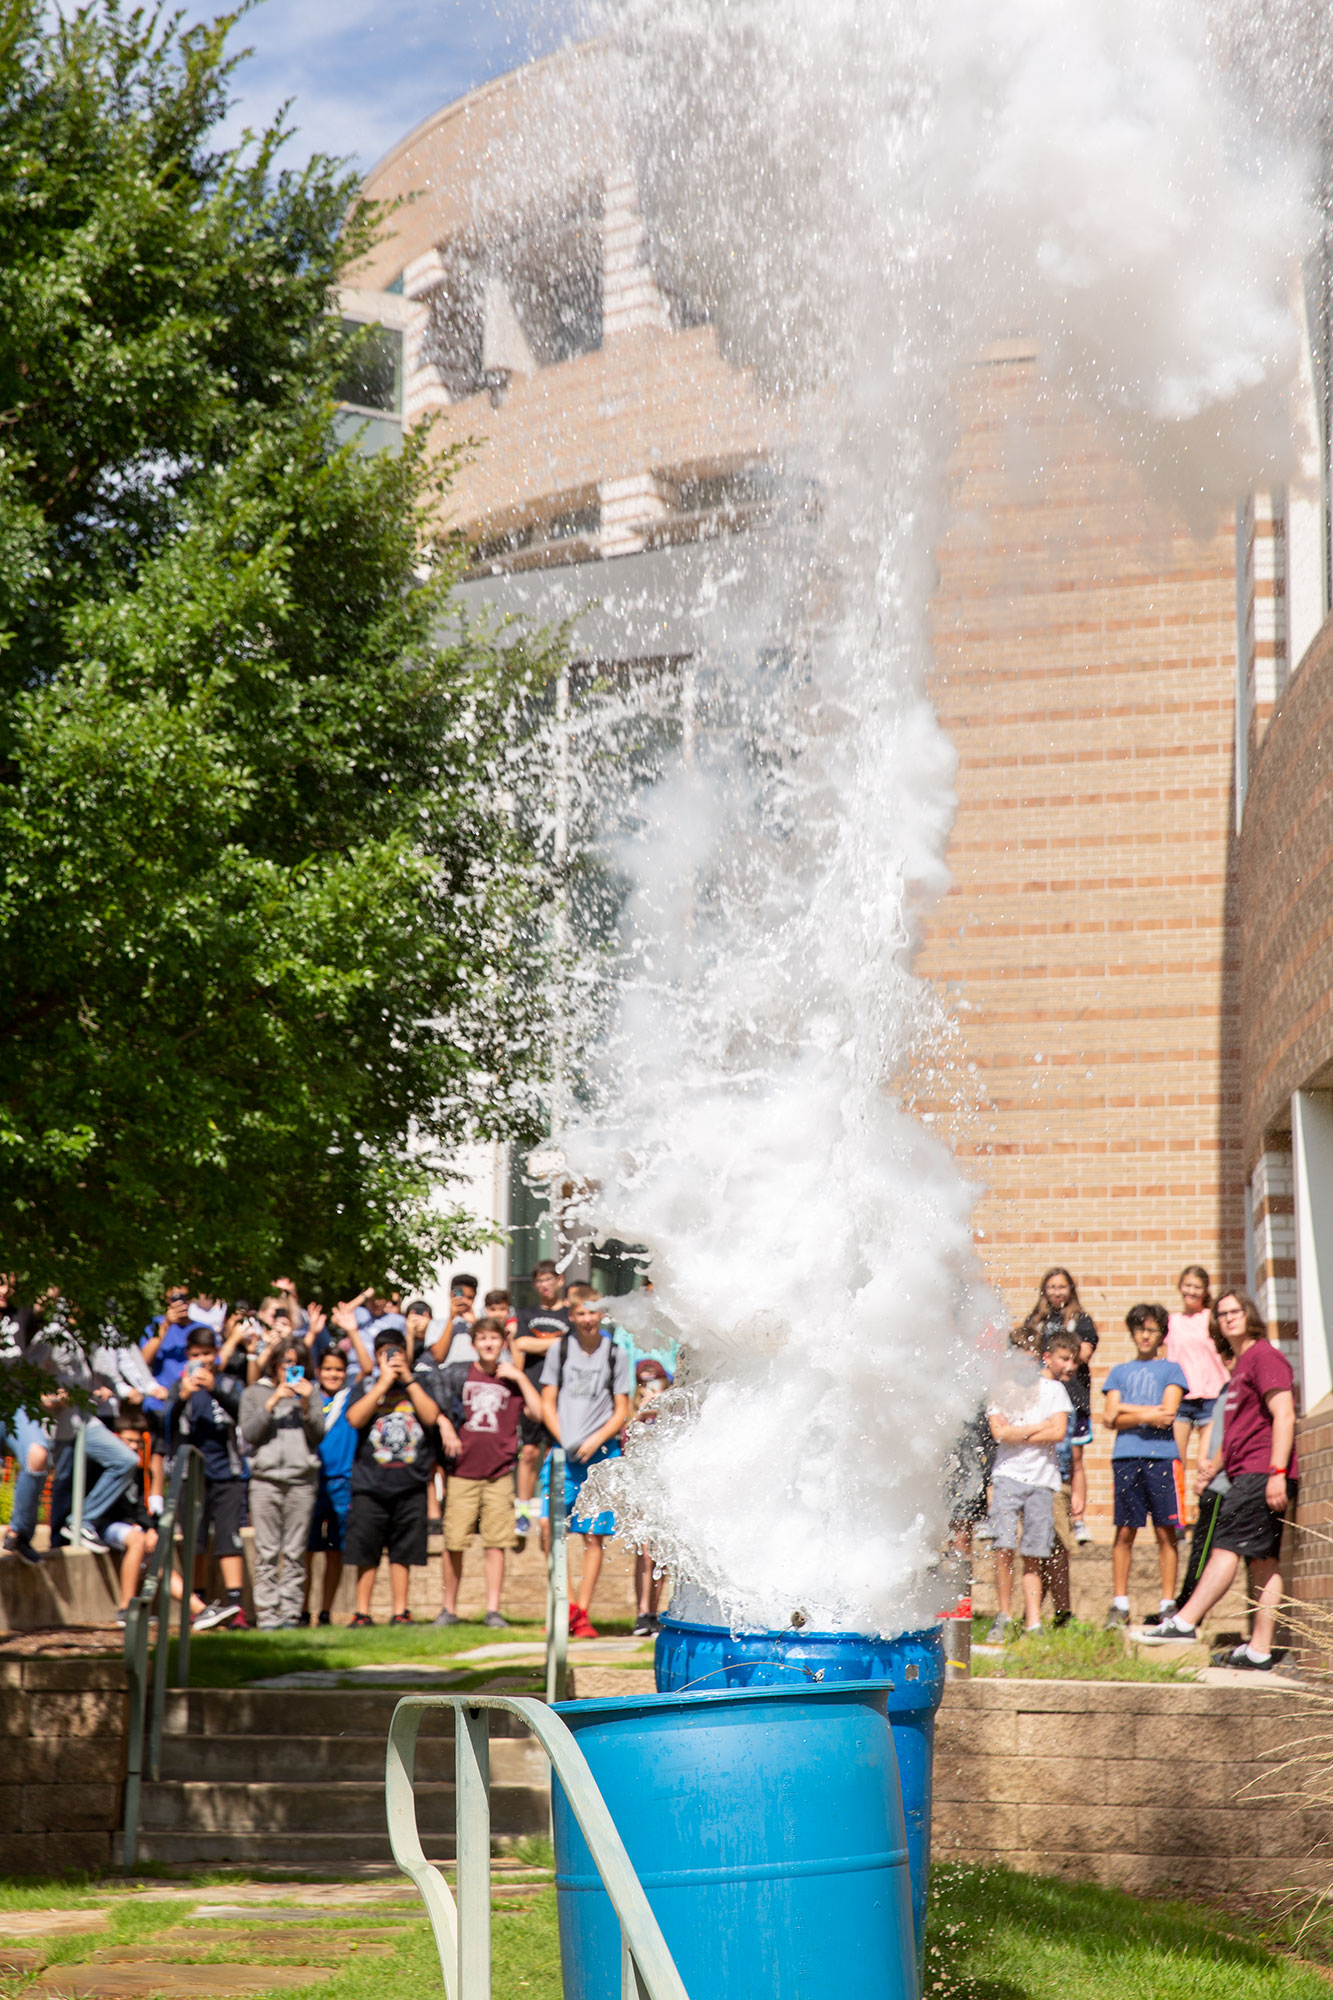 LN2 barrel depth charge blasting water into the air as children watch in amazement.